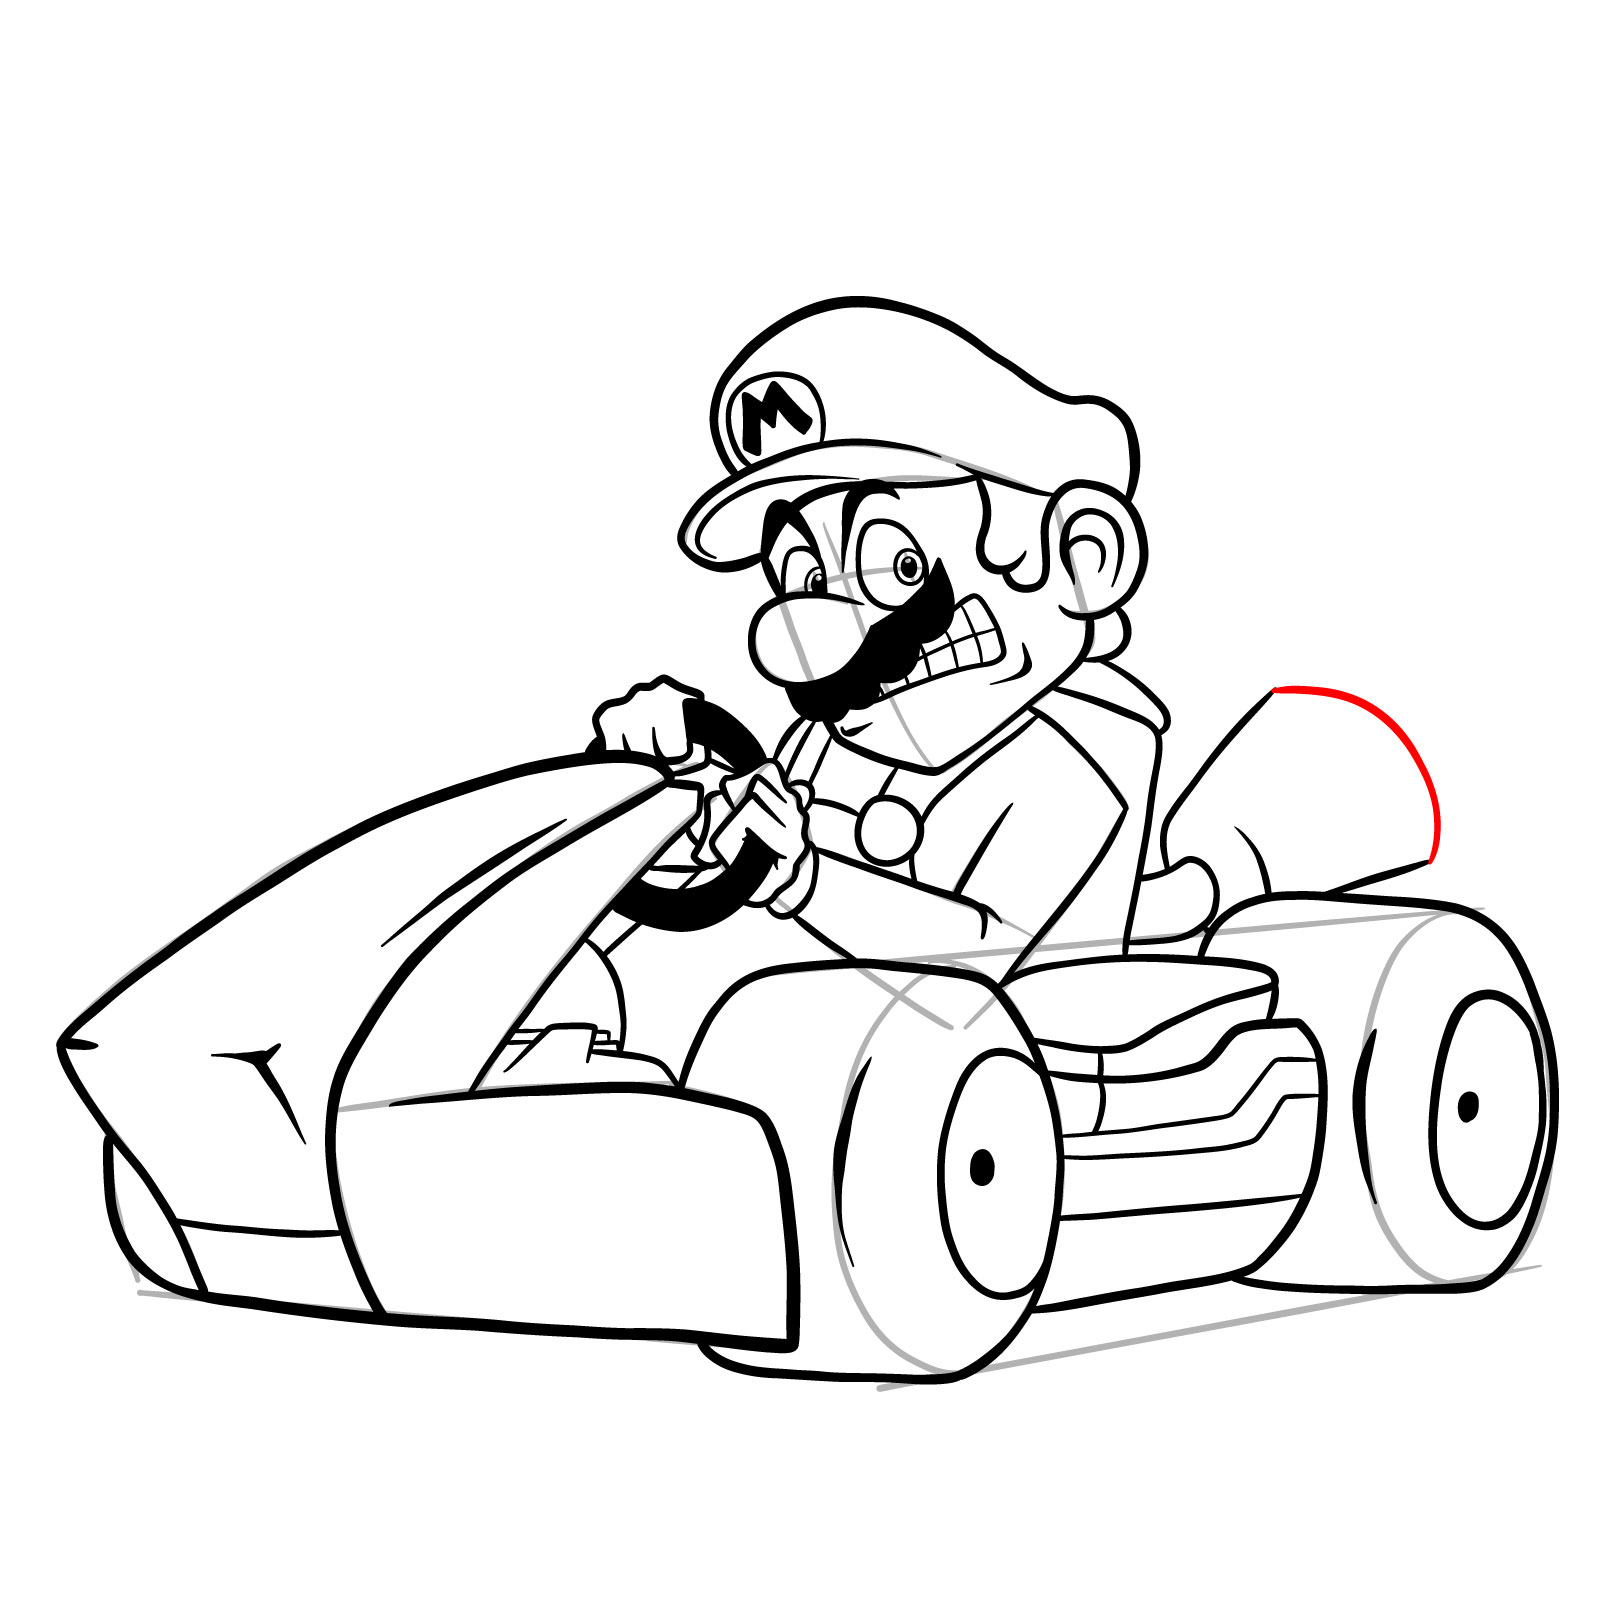 How to draw Race Traitors Mario - step 43